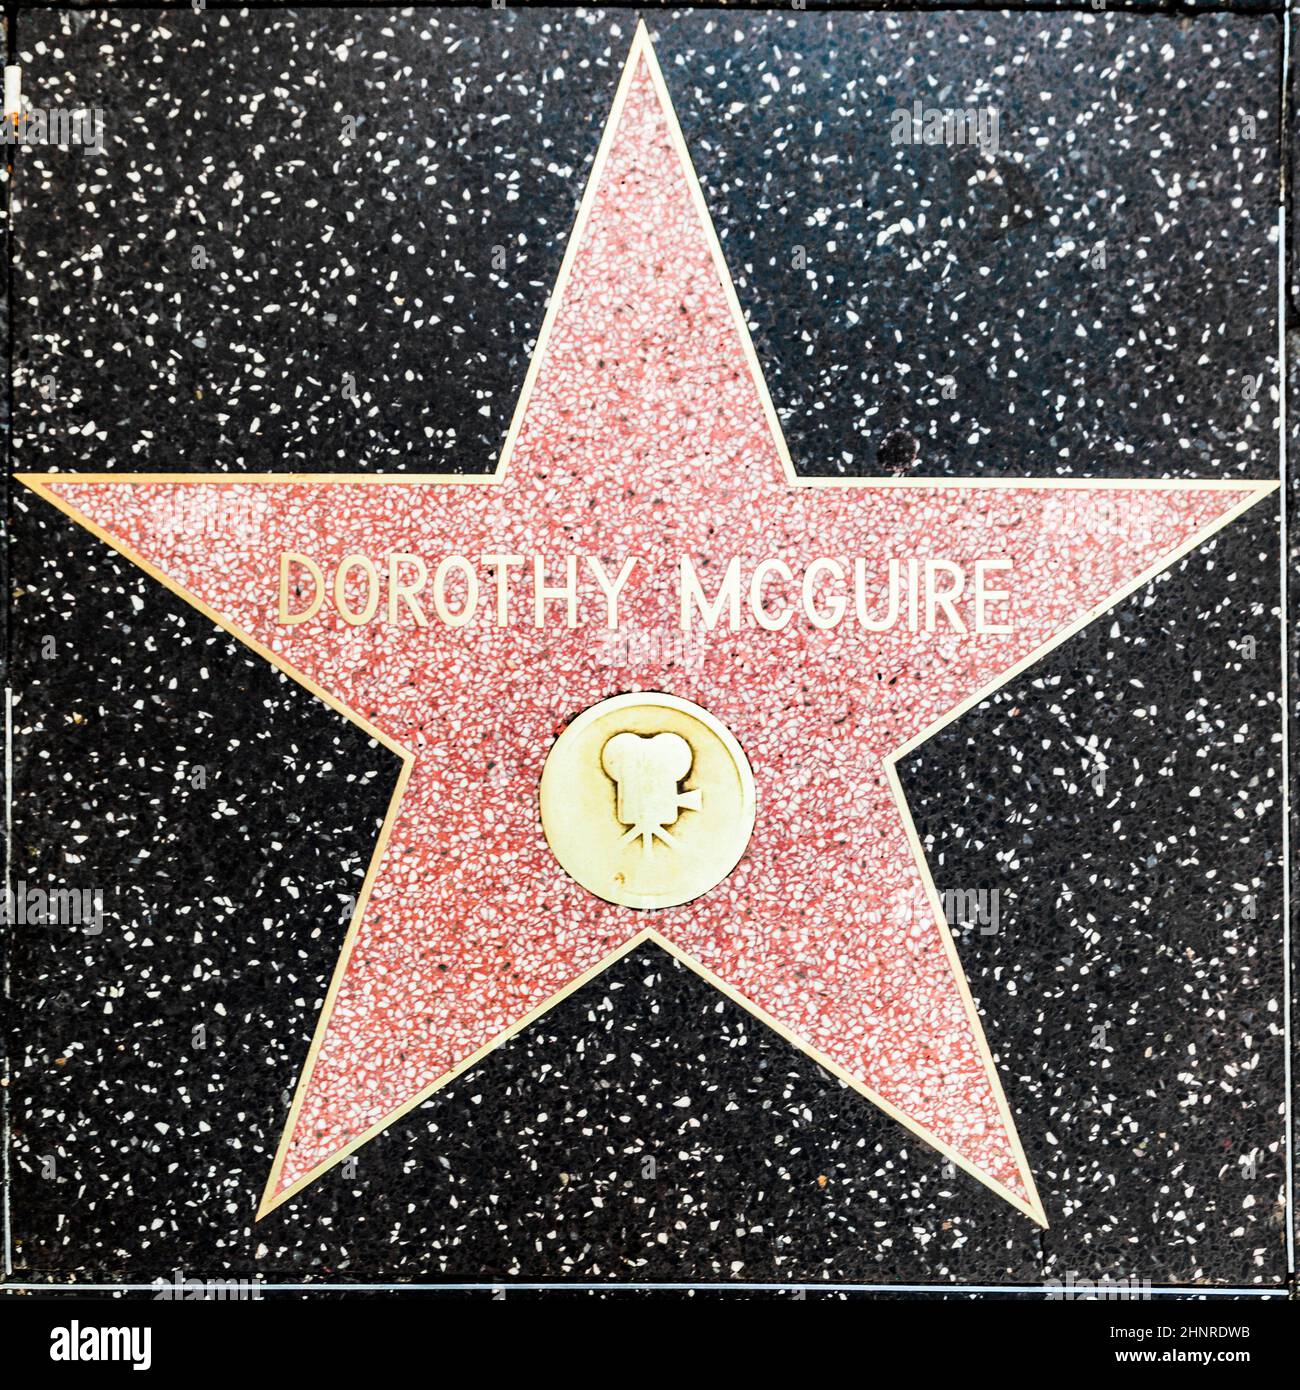 Dorothy Mcguires star on Hollywood Walk of Fame Stock Photo